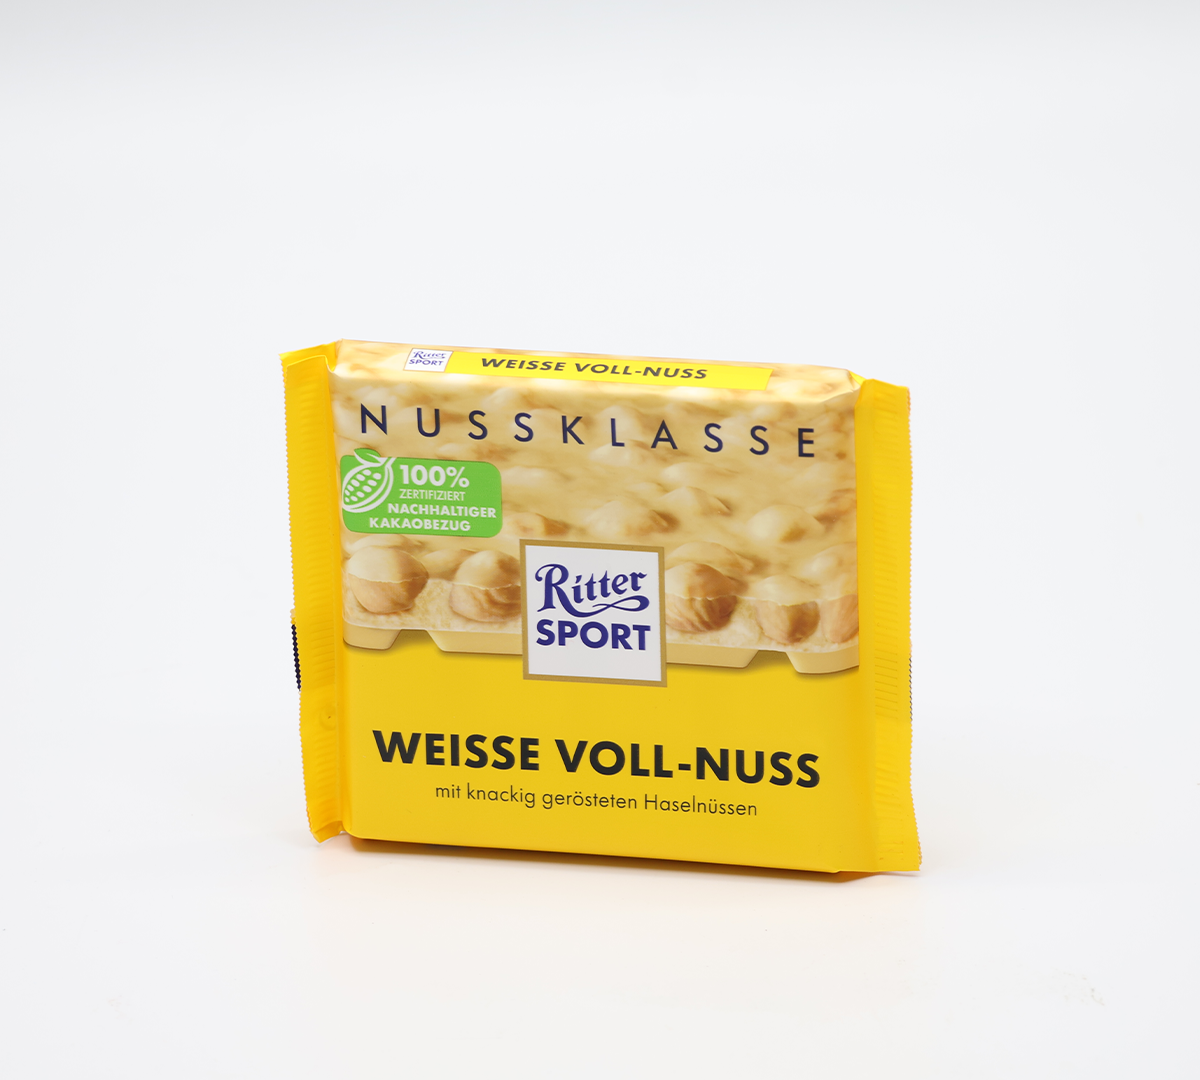 Ritter Sport White Chocolate with Whole Hazelnuts (Weisse Voll Nuss) 100g